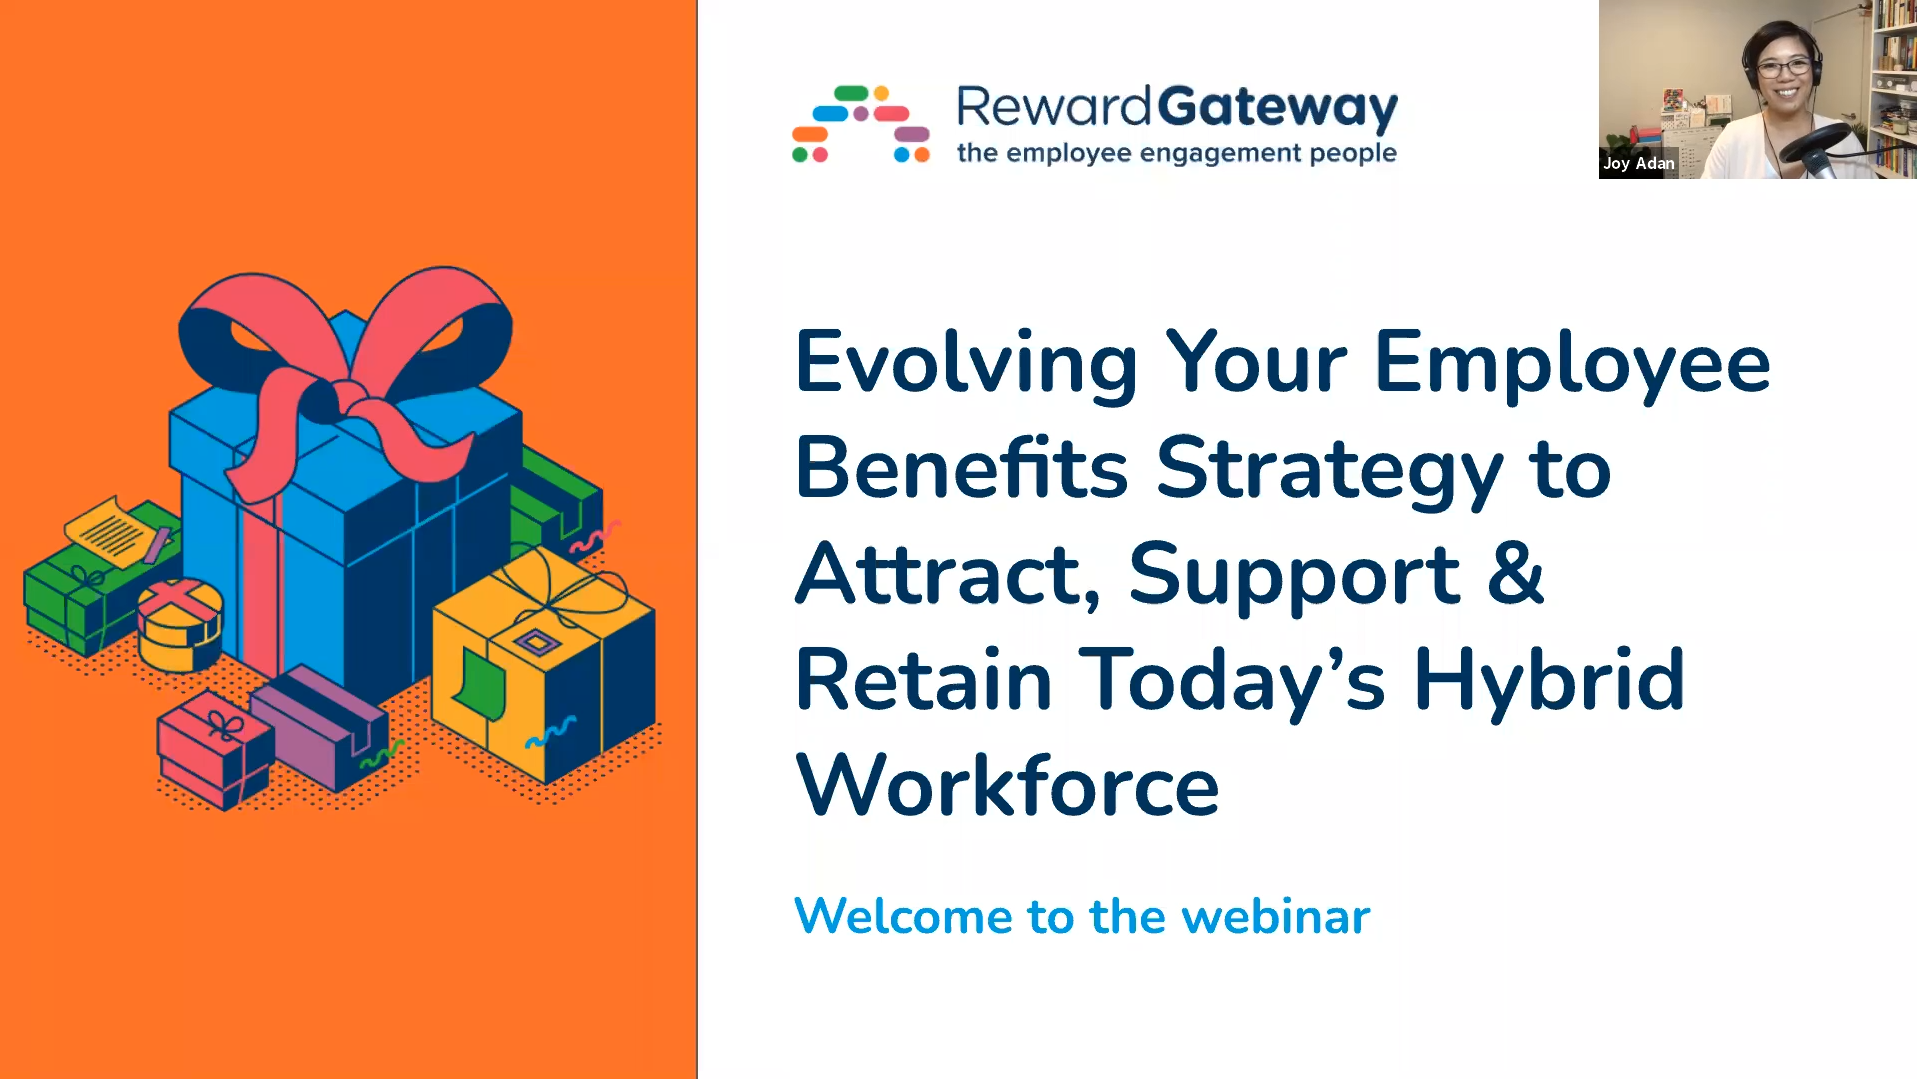 Evolving your employee benefits strategy to attract, support & retain today’s hybrid workforce